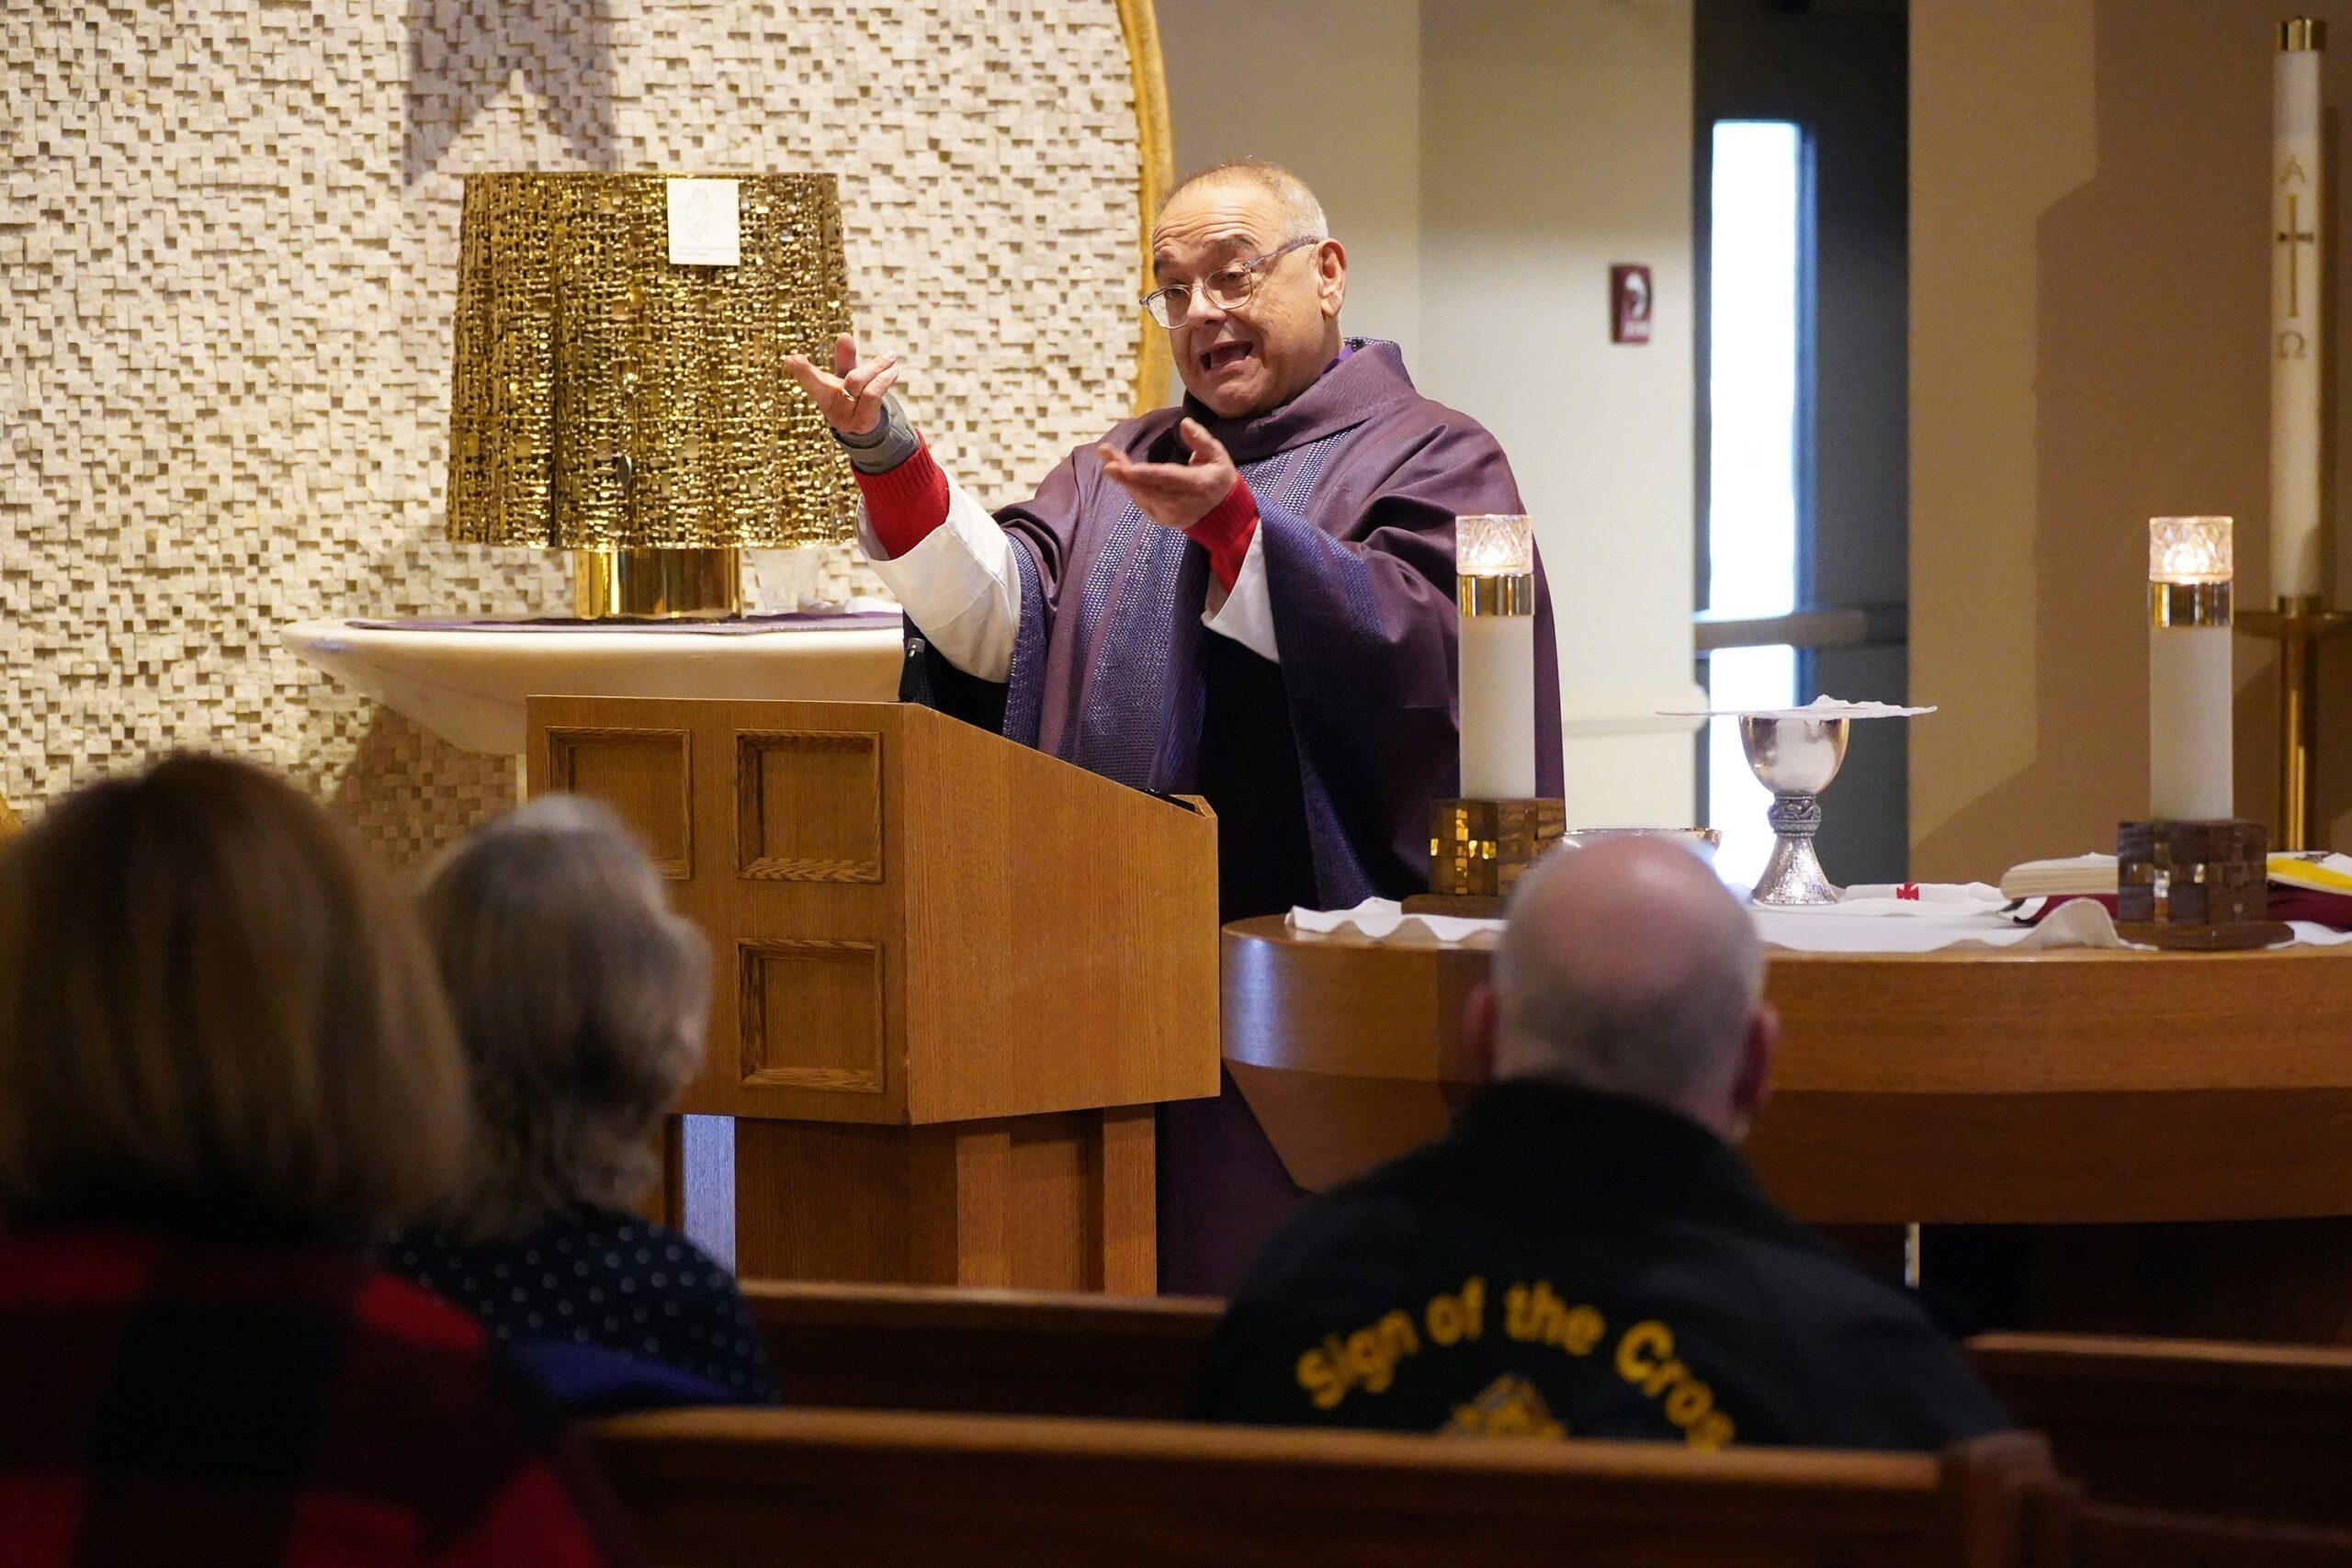 Msgr. Thomas Costa uses American Sign Language as he celebrates Mass for members of the Catholic Deaf Community of Long Island, N.Y., on the Fourth Sunday of Advent at St. Frances de Chantal Church in Wantagh, N.Y., Dec. 20, 2020. (CNS photo/Gregory A. Shemitz)